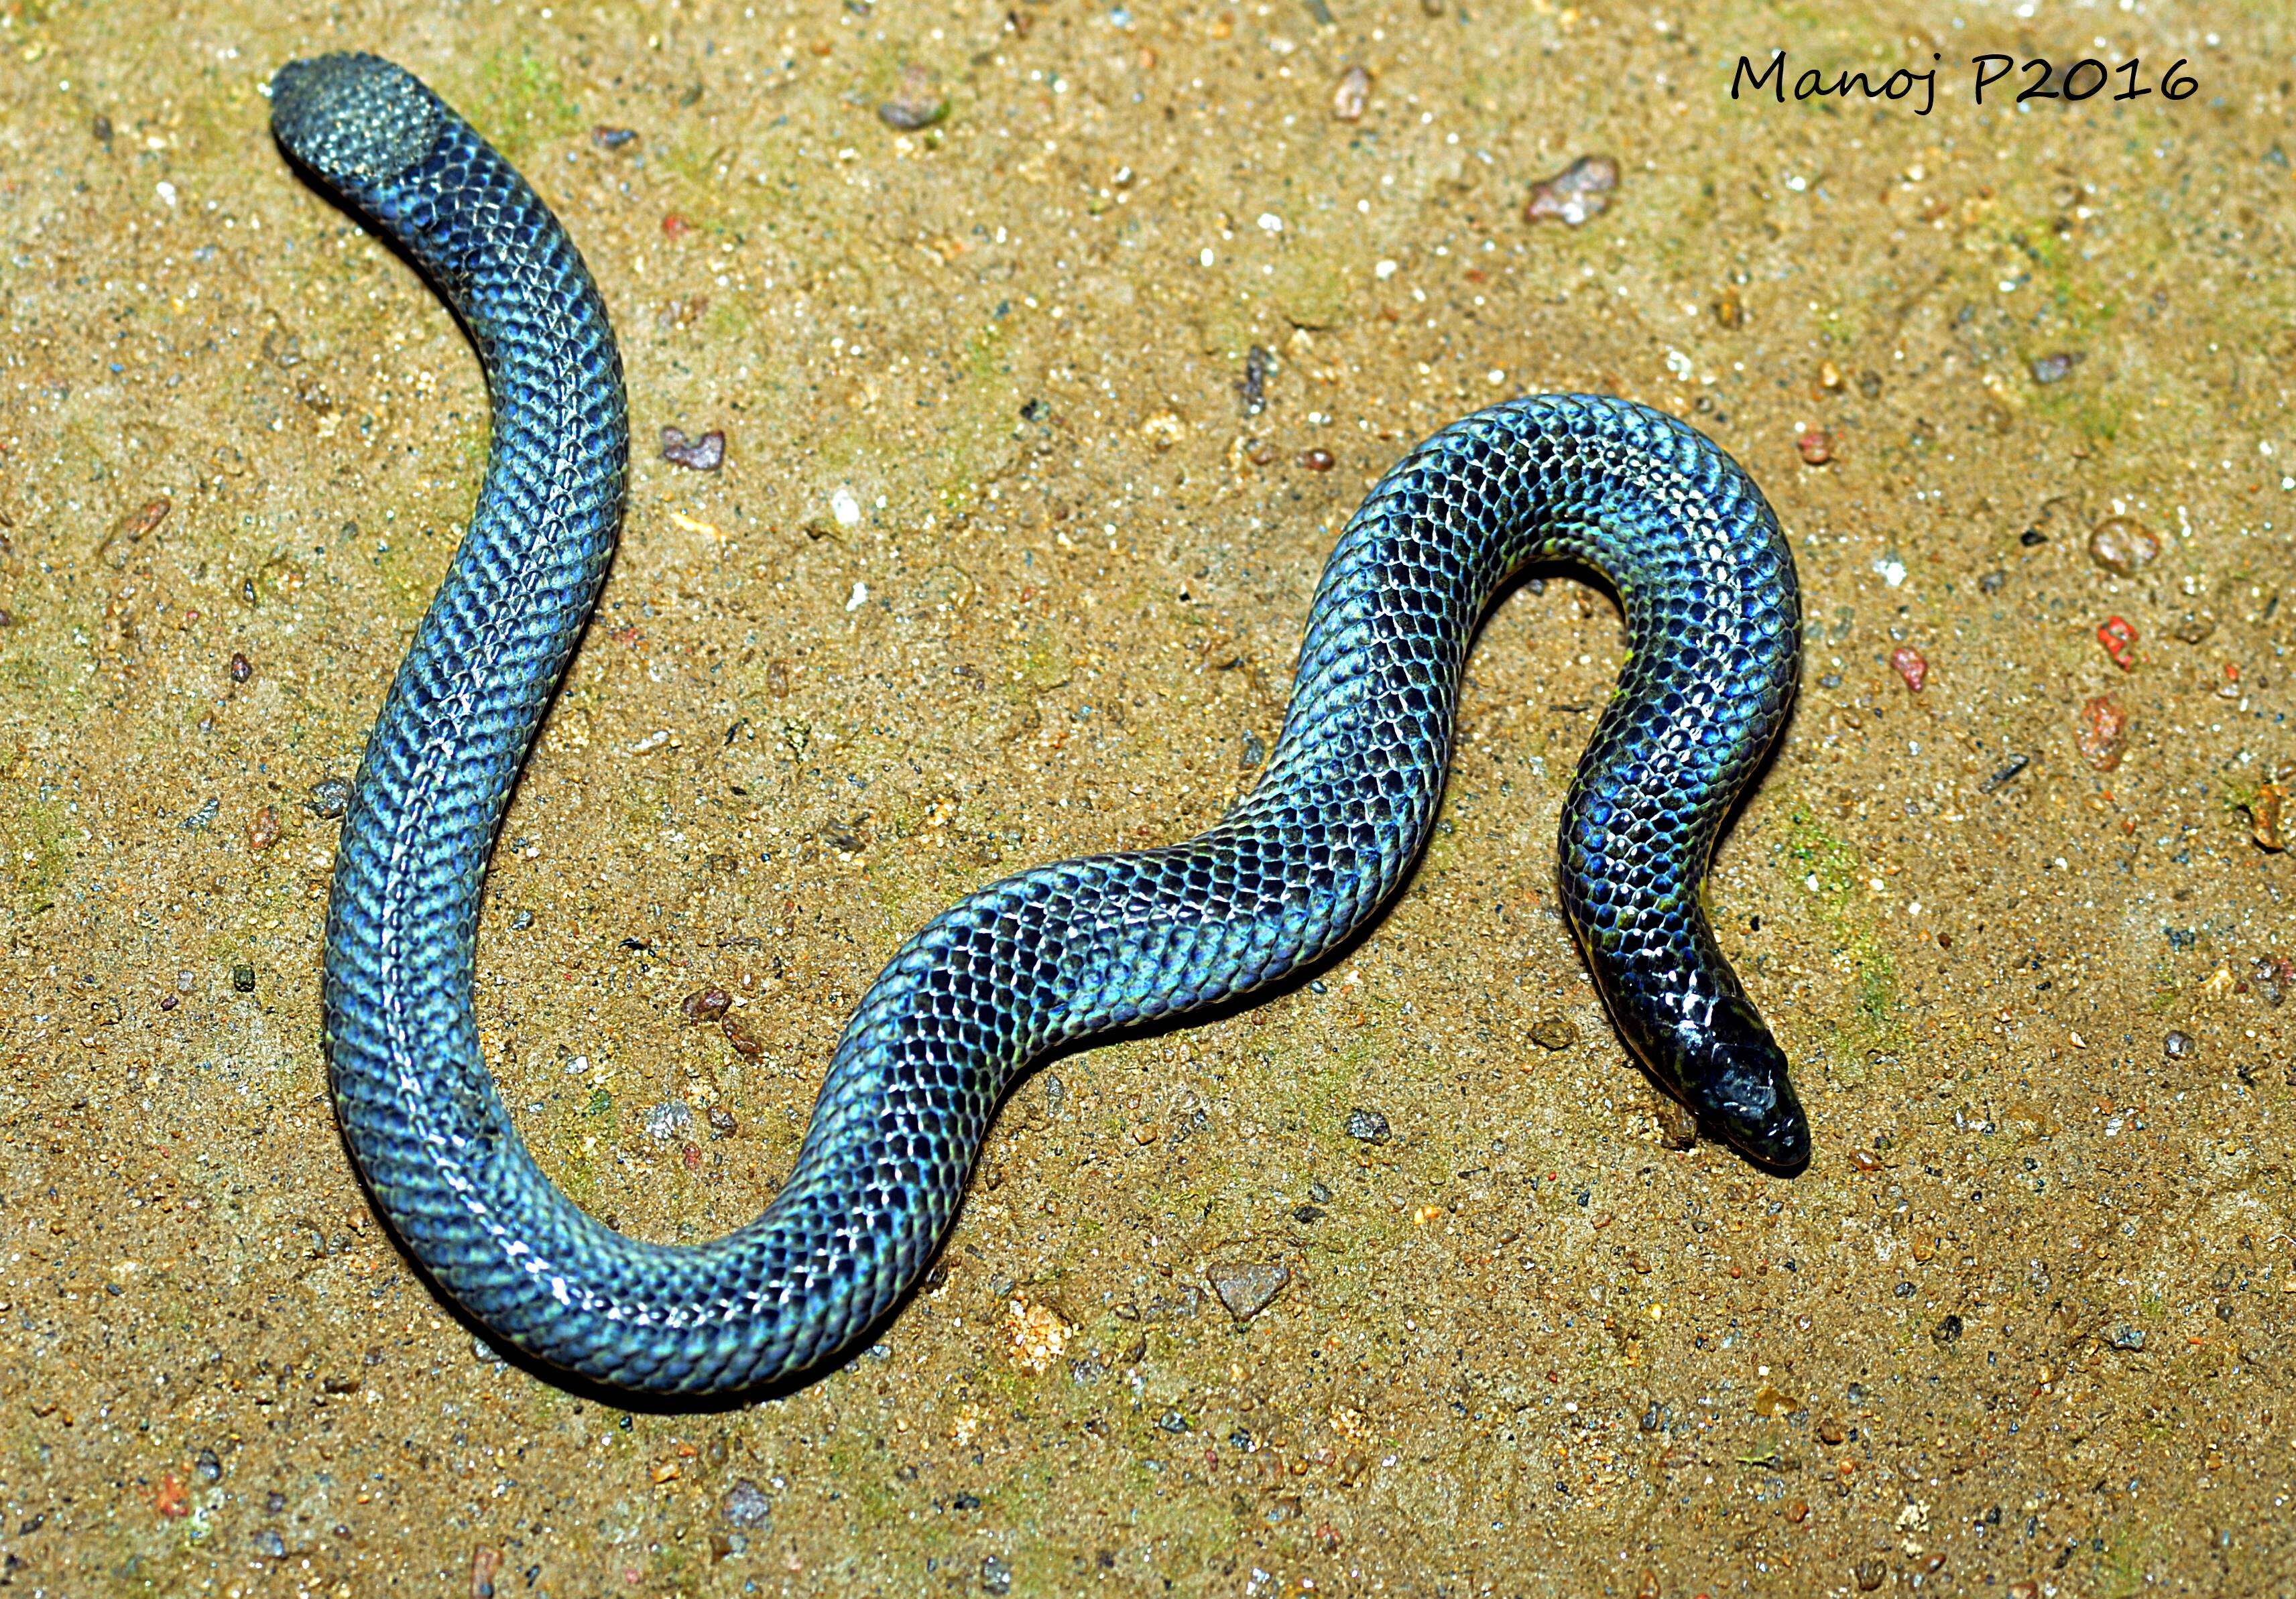 Image of shieldtail snakes